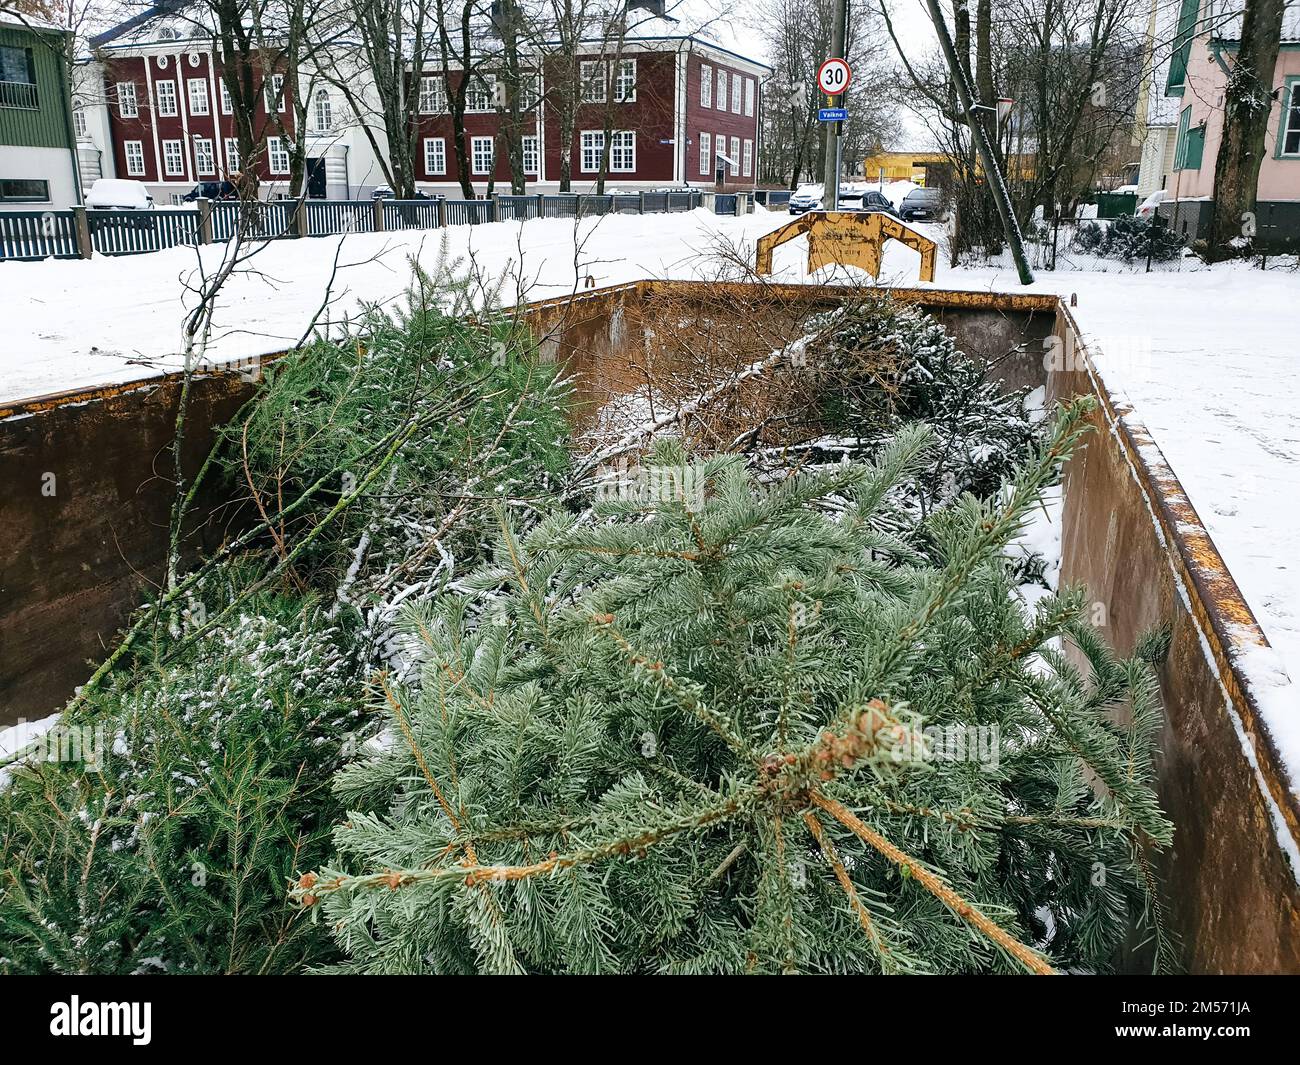 Tallinn, Estonia - January 22, 2022: Large garbage container on a city street for people to bring their old Christmas trees in. Free municipal service Stock Photo